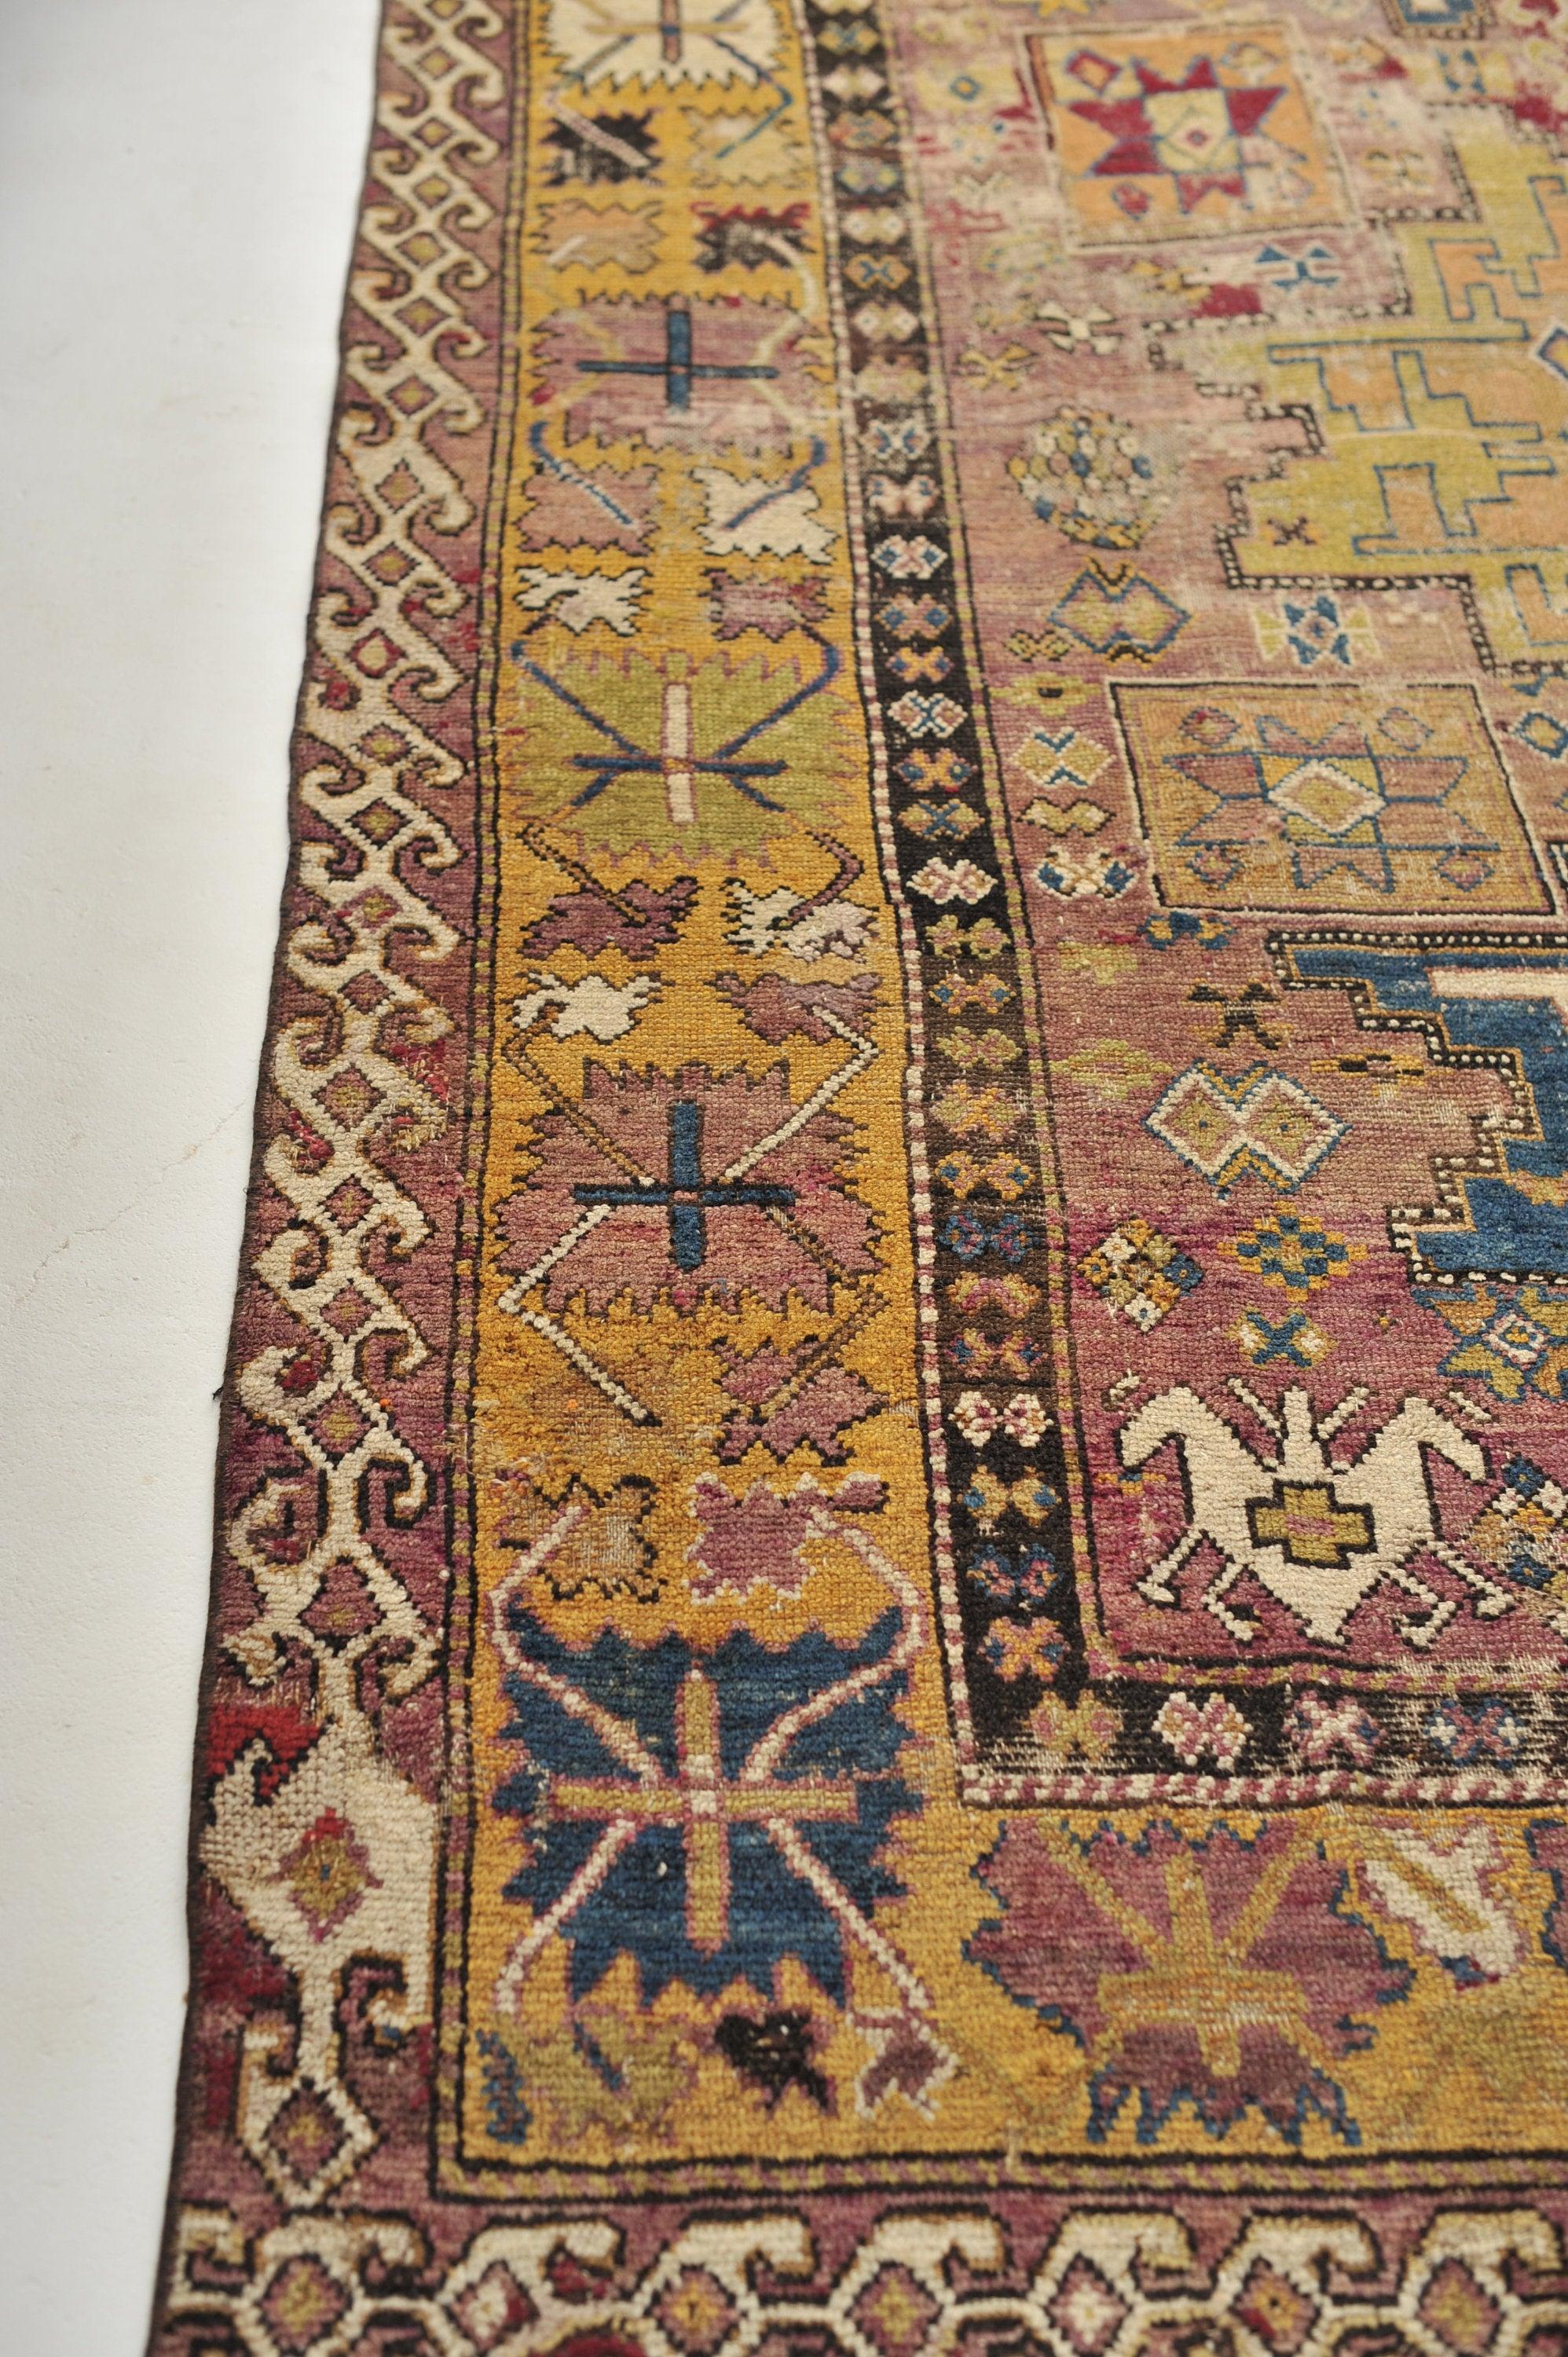 20th Century Antique Textile Rug with Lavender, Sunflower Yellows, & Blues, c. 1900 For Sale